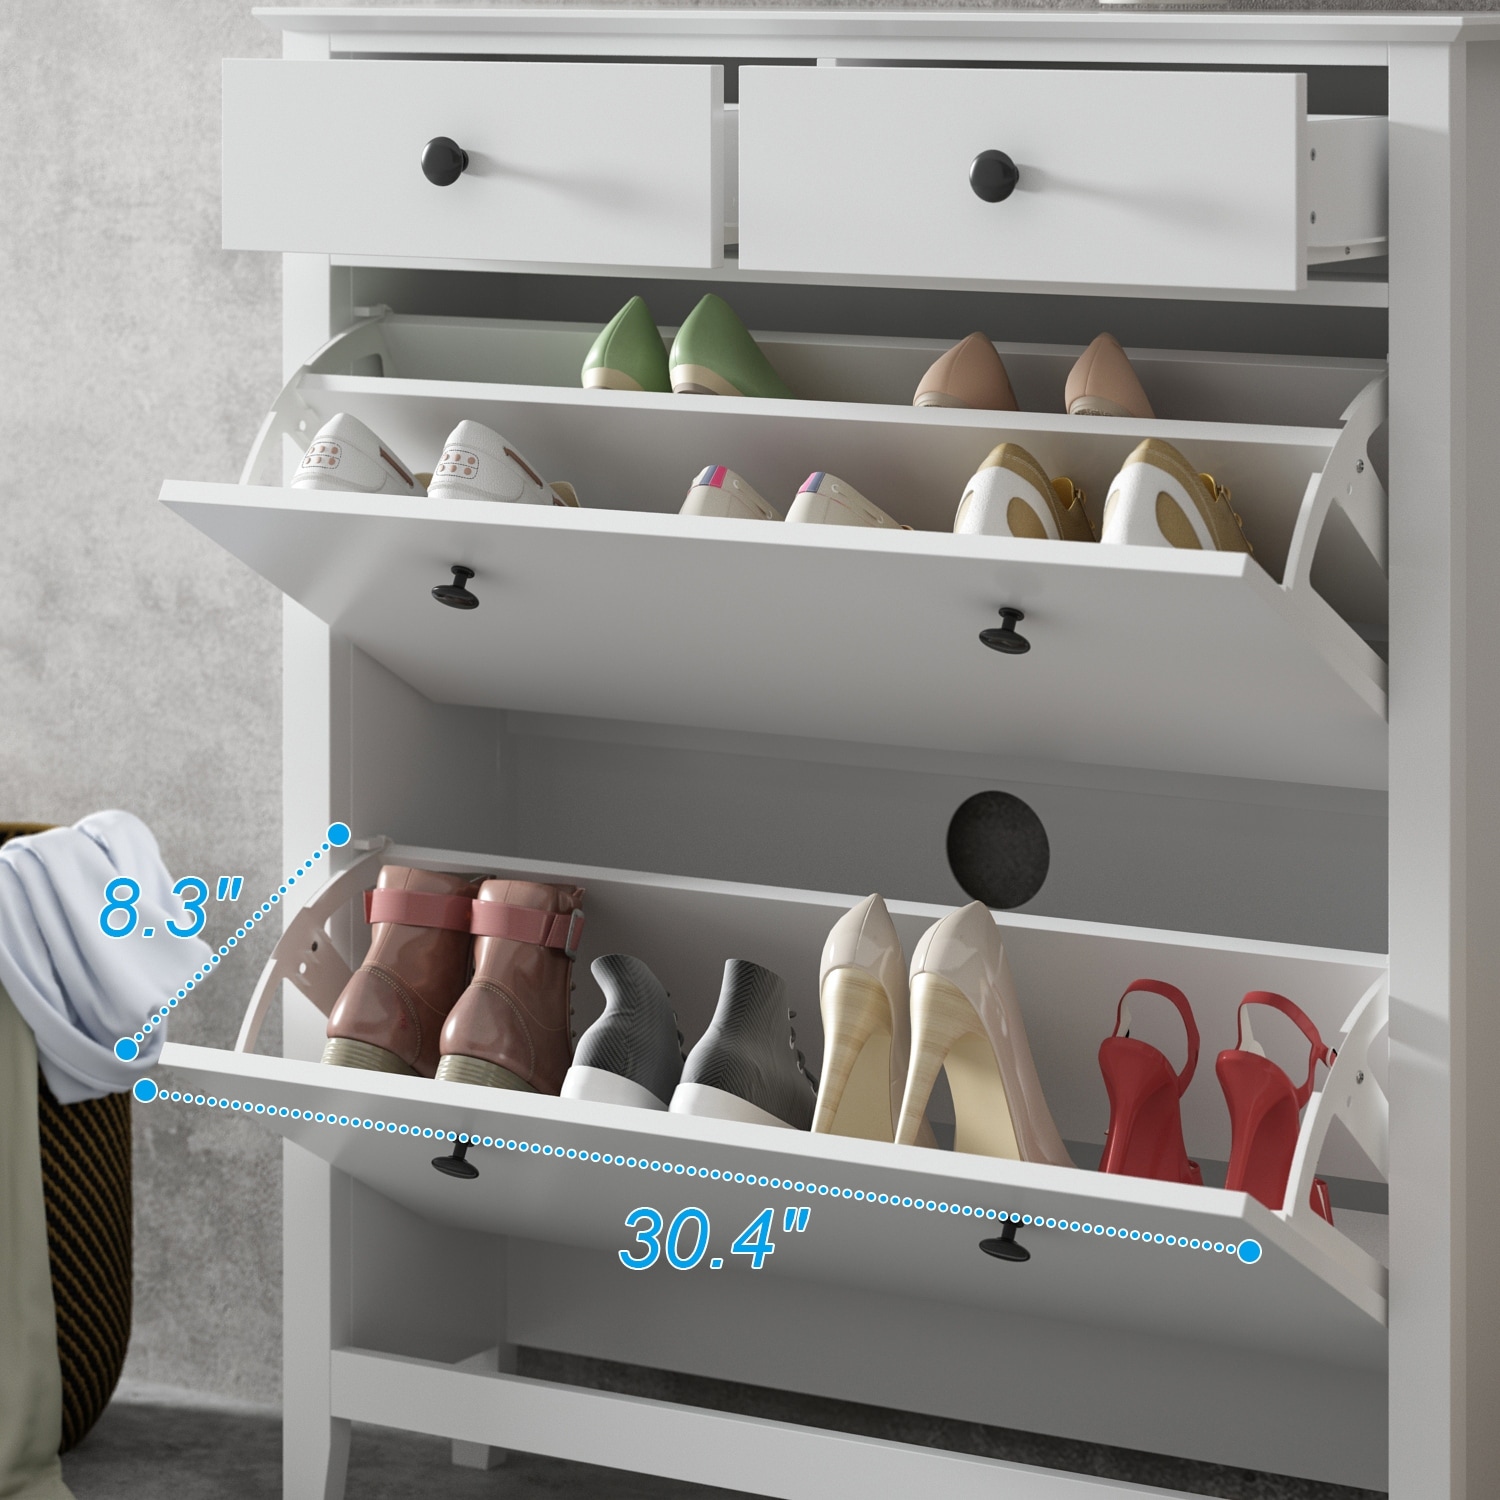 https://ak1.ostkcdn.com/images/products/is/images/direct/96150cf62ed88e39dbbf0befd9684858ba7759d3/Shoe-Cabinet-Freestanding-Storage-Cabinet-Shoe-Rack-Storage-Organizer.jpg